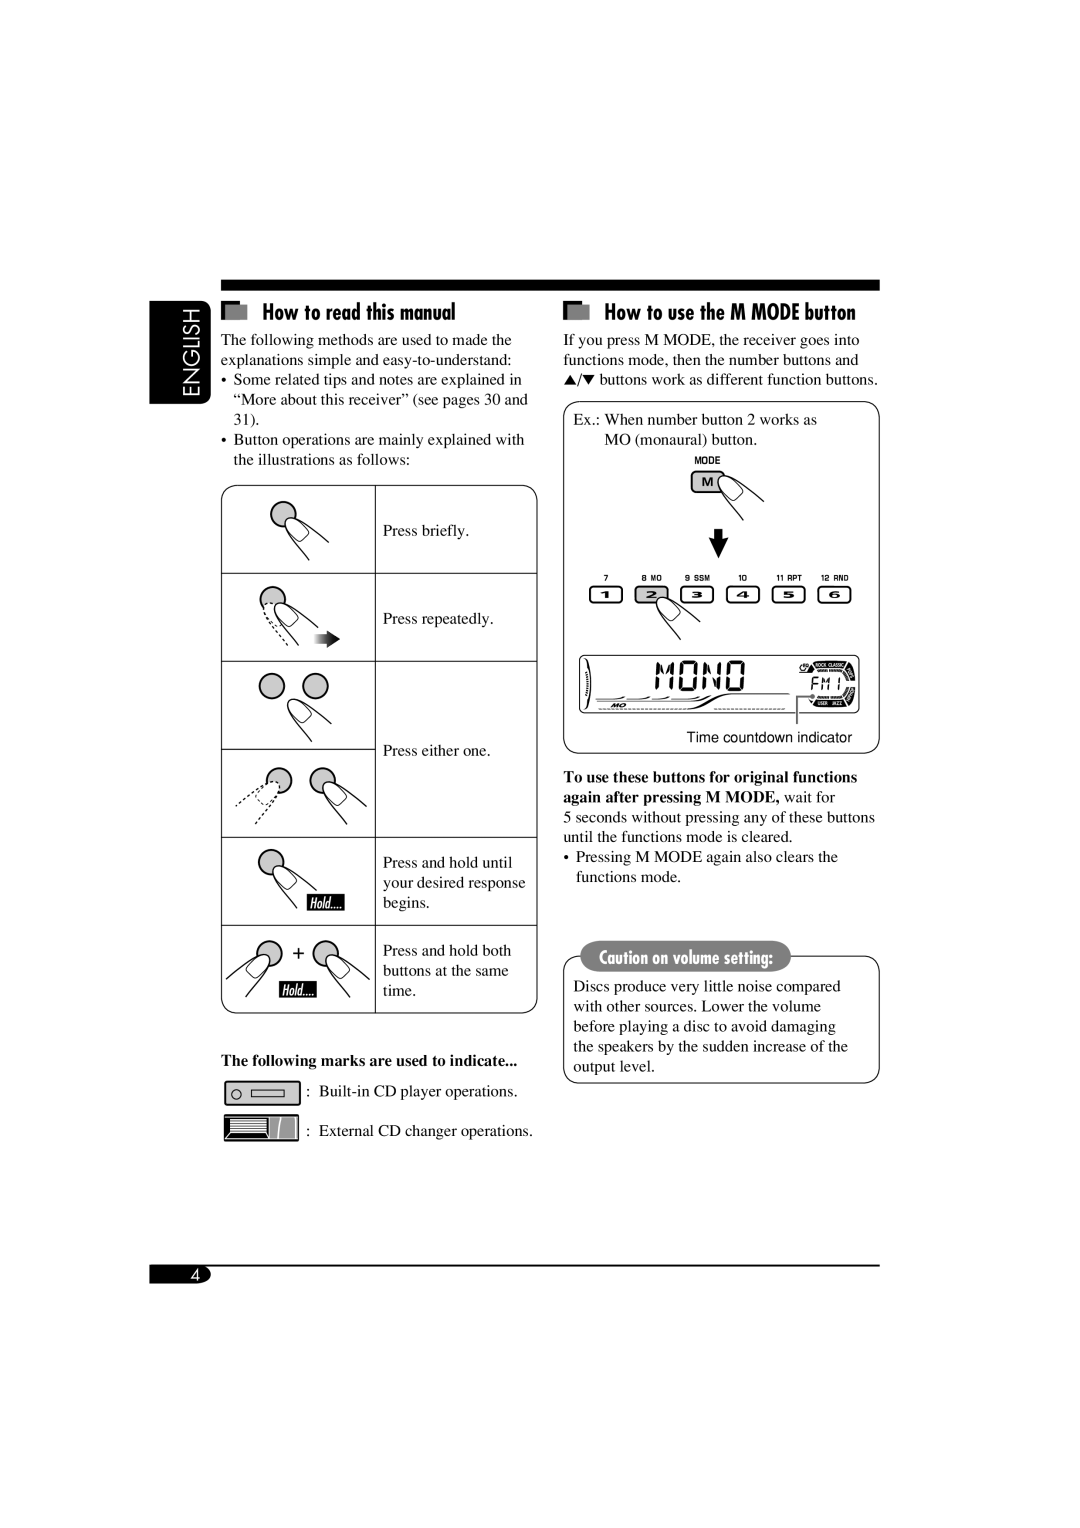 JVC KD-AR560, KD-G510 How to read this manual, How to use the M MODE button, English, Caution on volume setting 